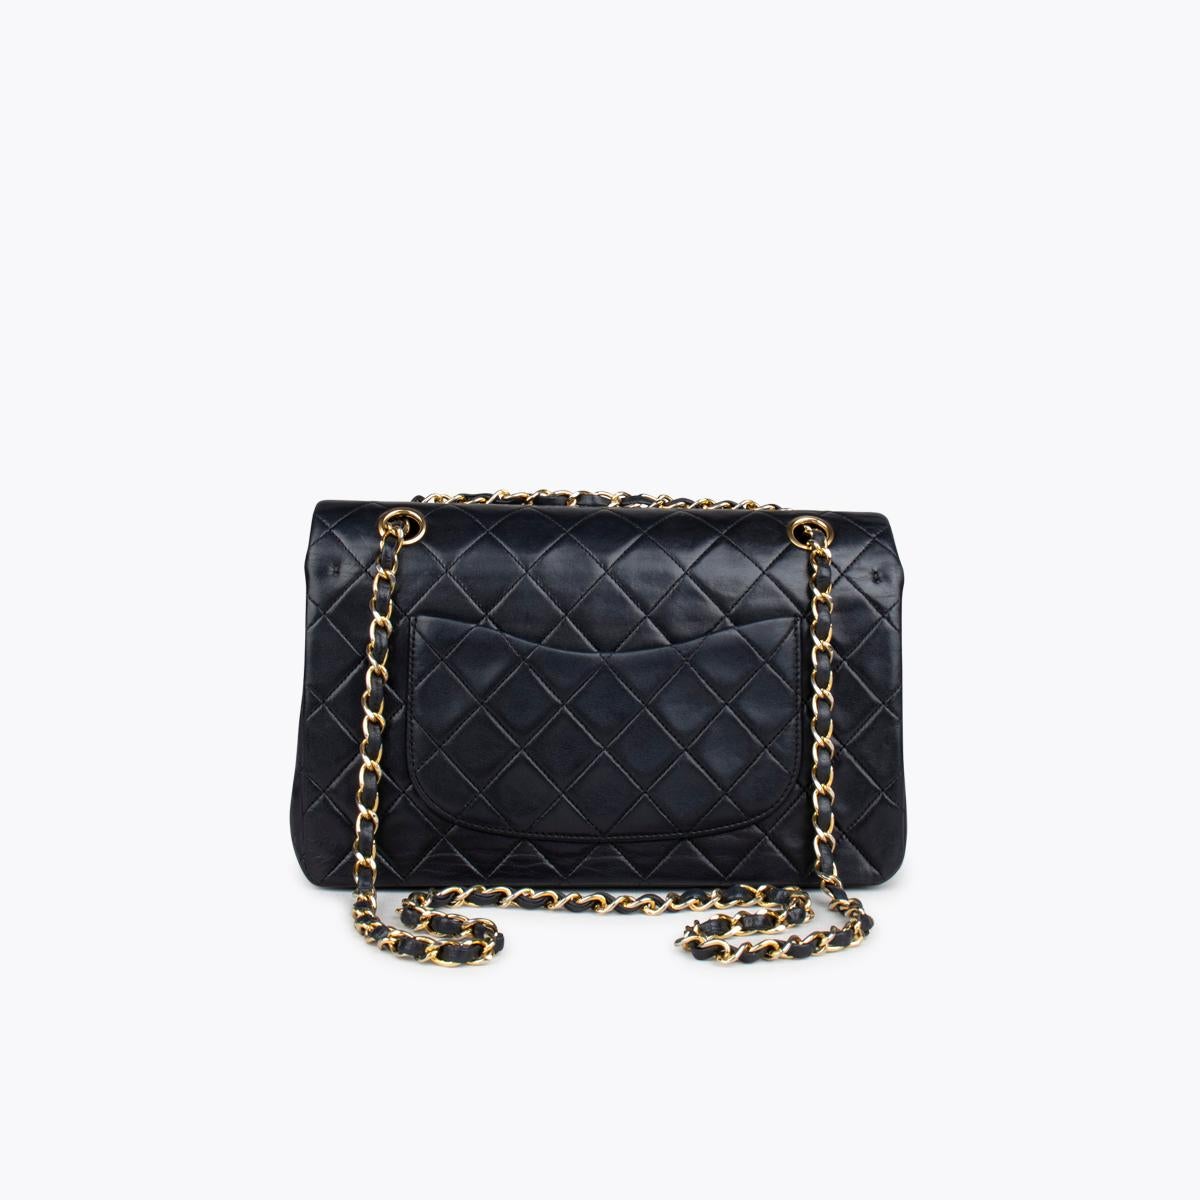 Chanel Medium Classic Double Flap Bag In Good Condition For Sale In Sundbyberg, SE